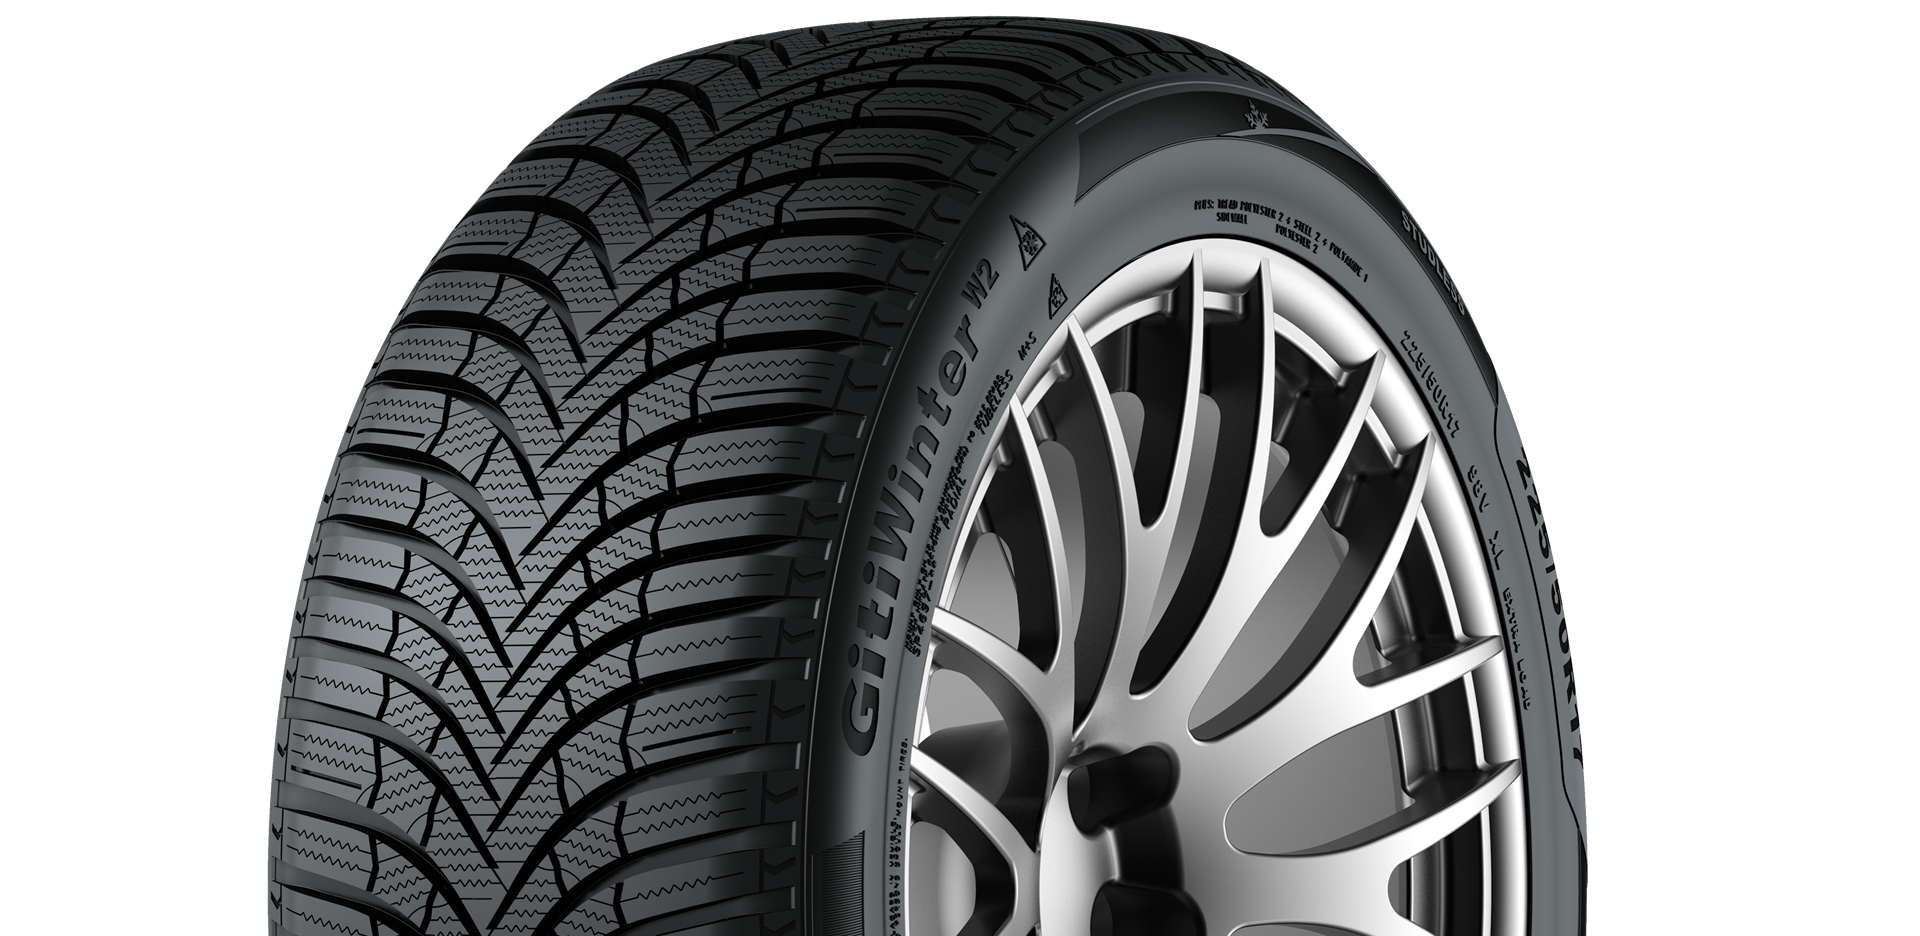 GitiWinterW2 delivers double-digit improvements over previous winter tyre